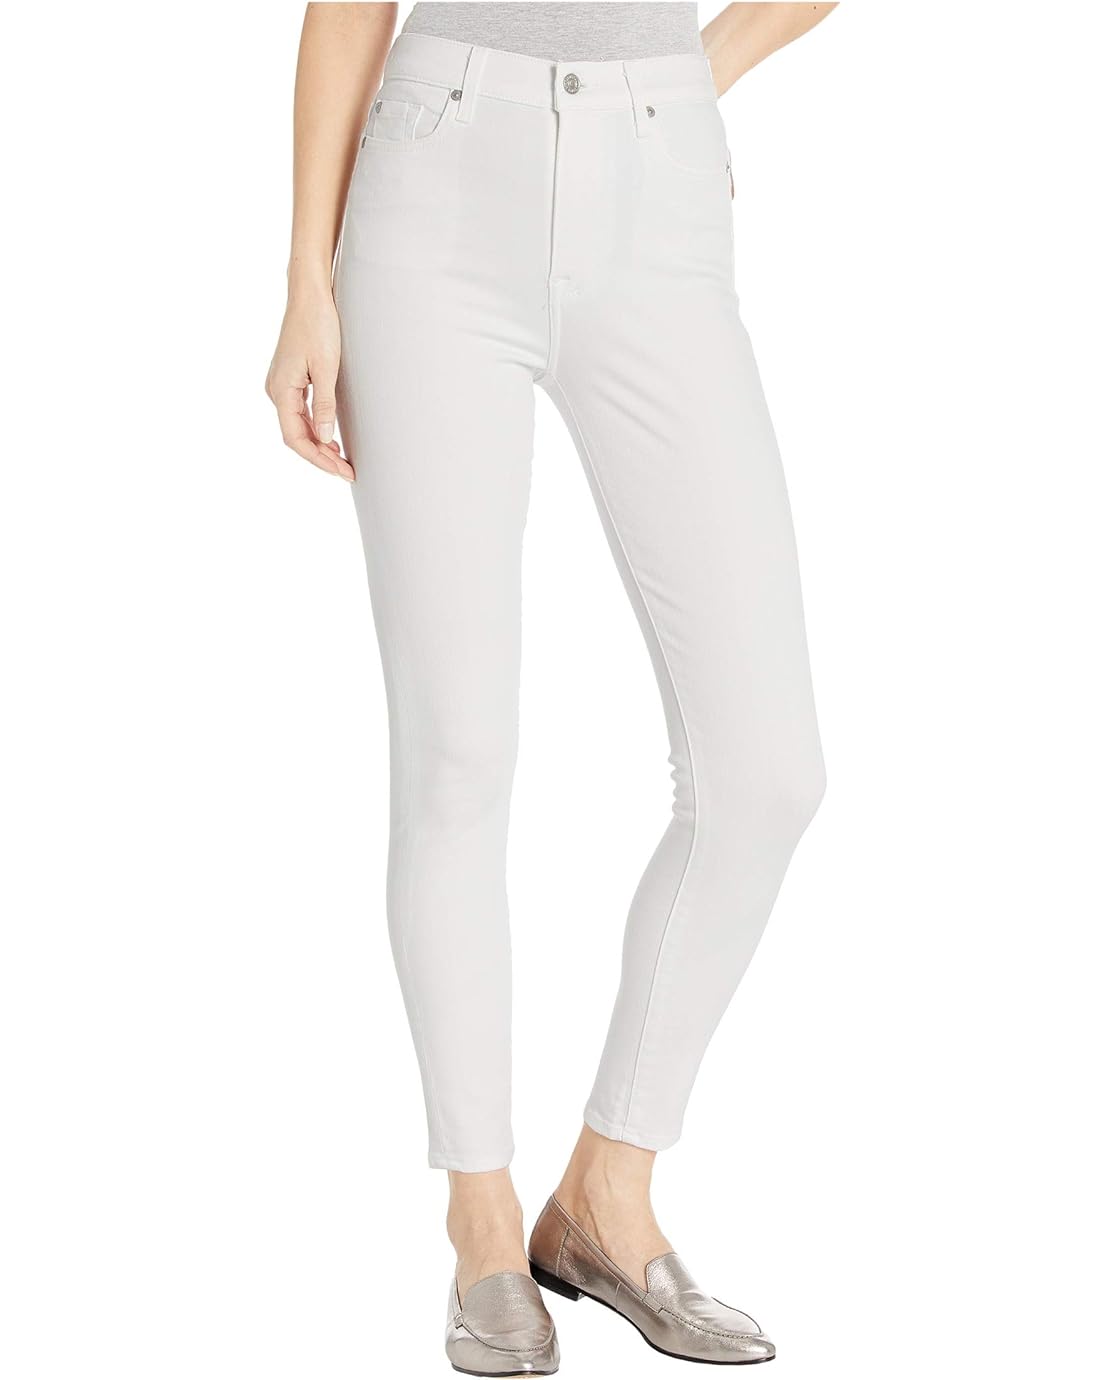  7 For All Mankind High-Waist Ankle Skinny in Slim Illusion White